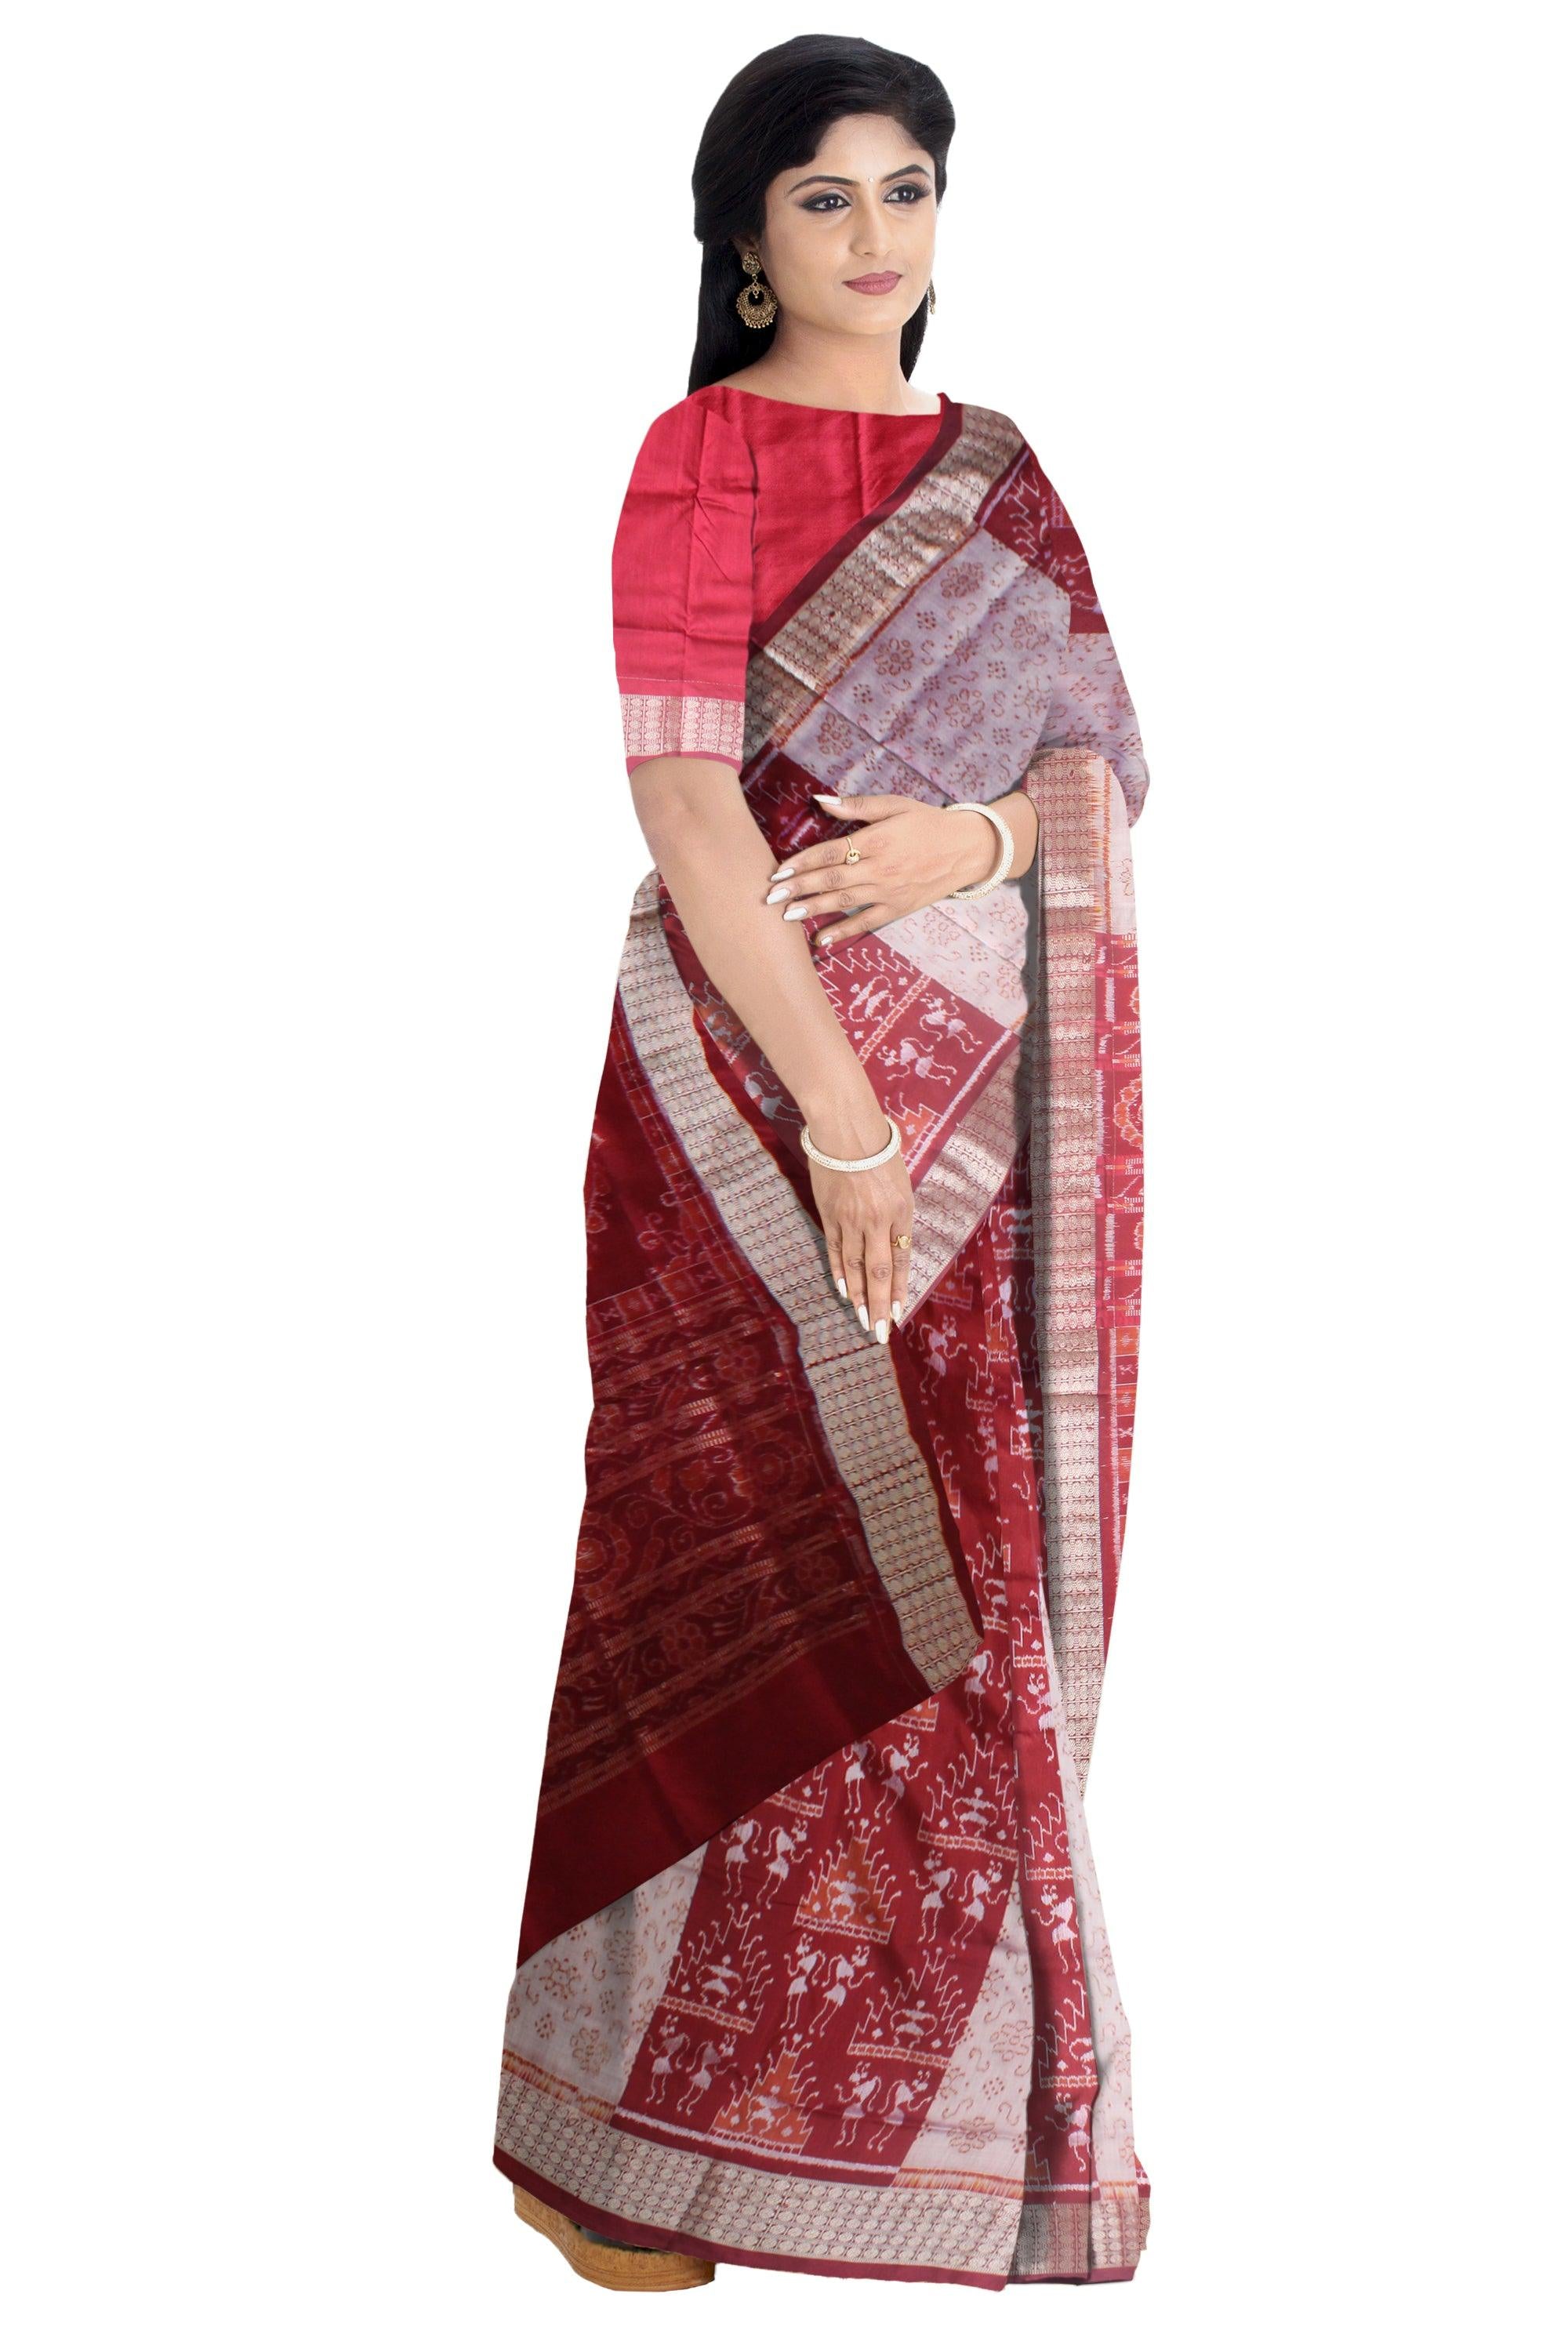 LATEST NEW TERRACOTTA BASED PATA SAREE IN  GREY, MAROON AND ROSE COLOR AVAILABLE WITH BLOUSE  PIECE. - Koshali Arts & Crafts Enterprise